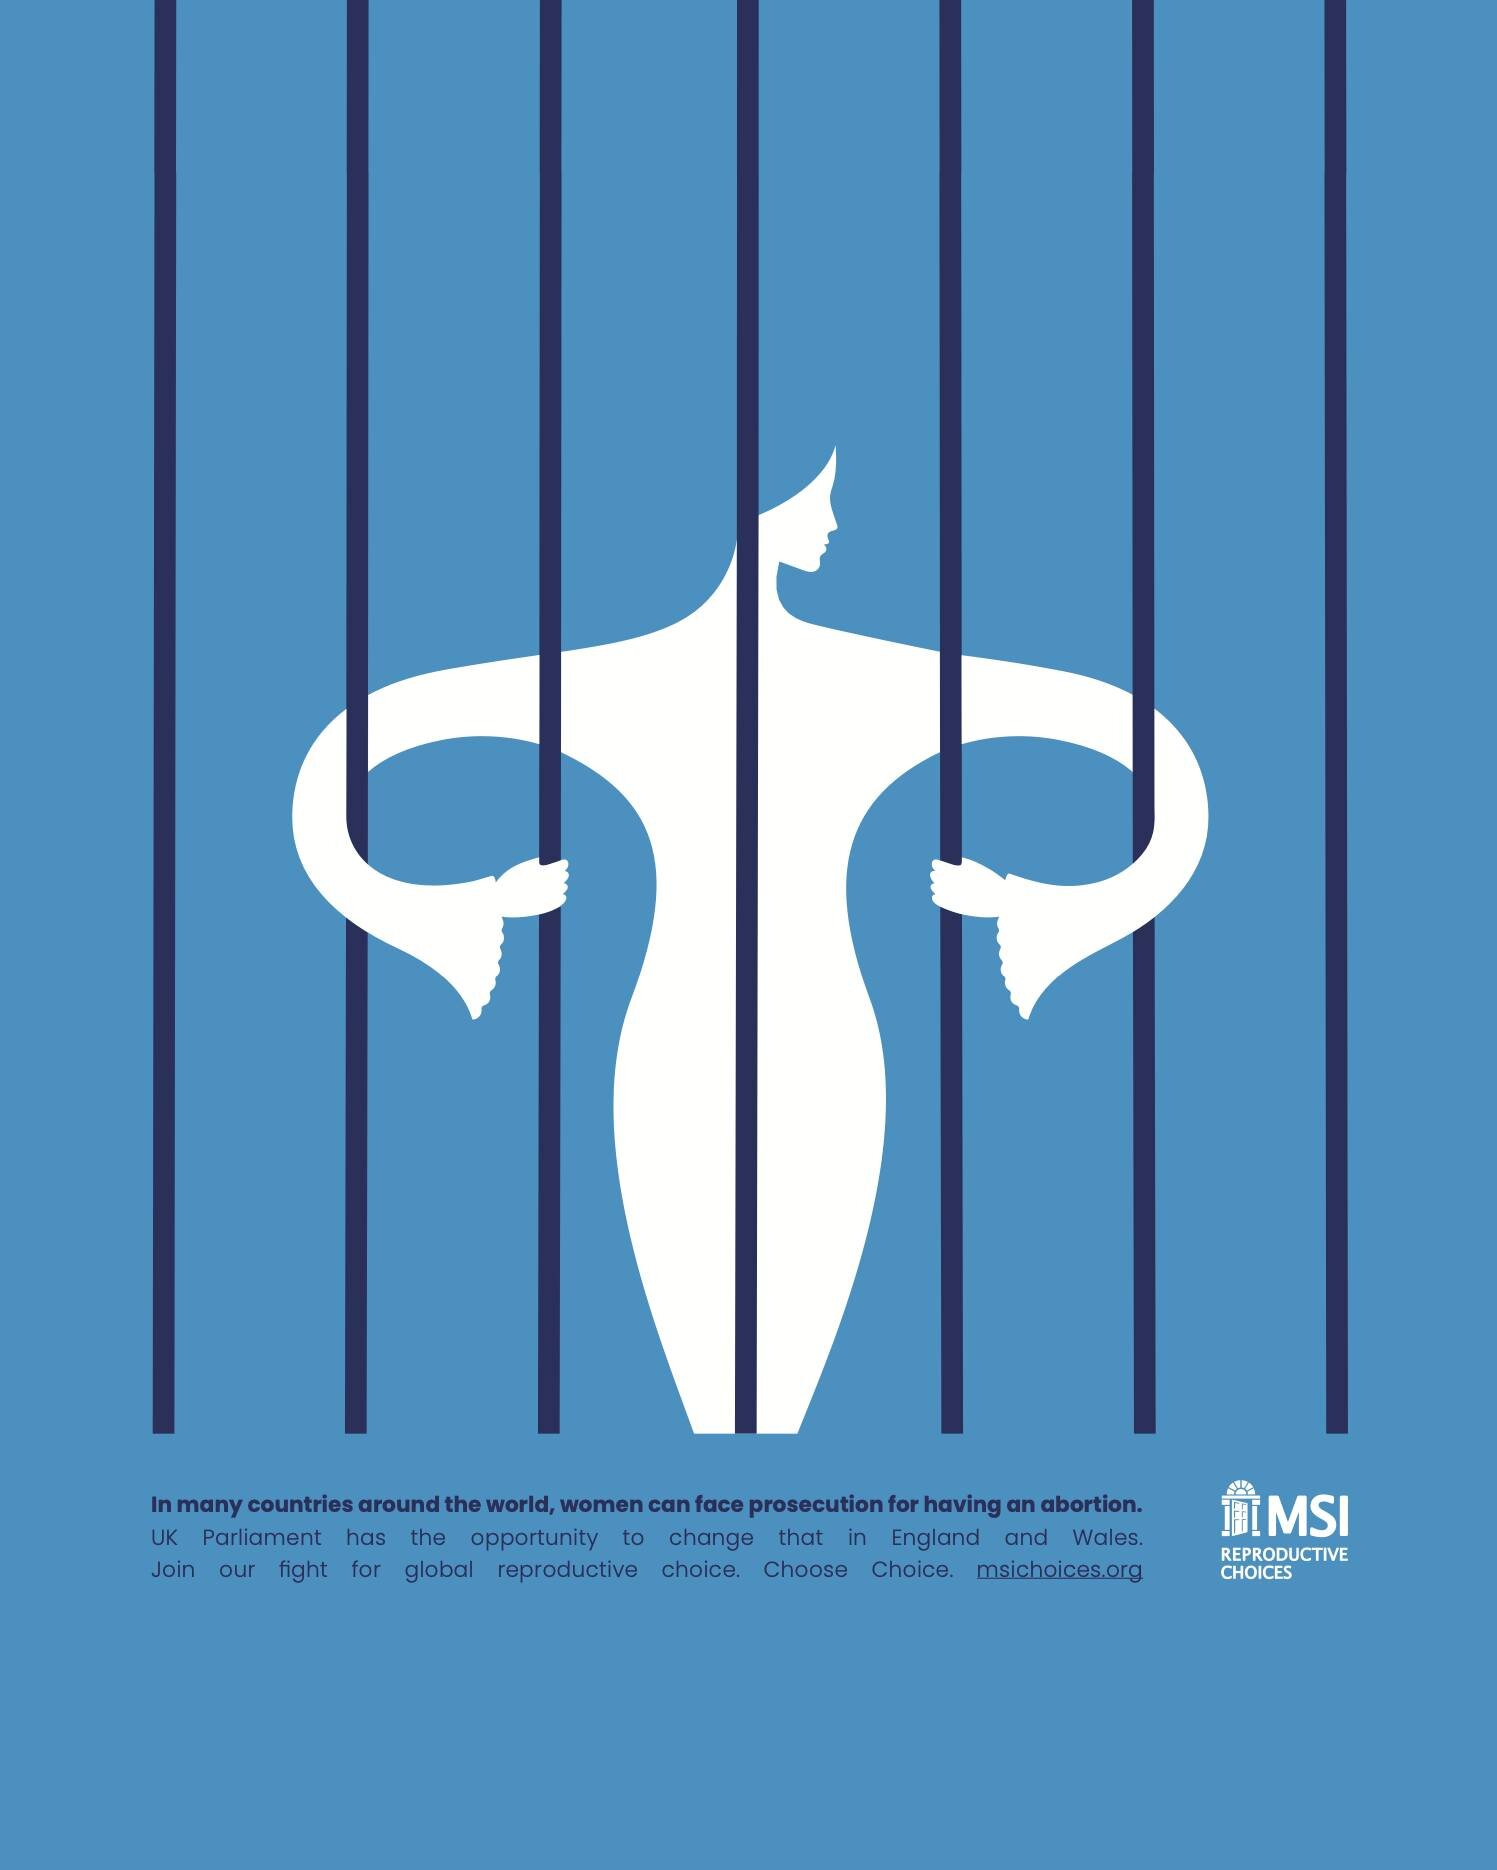 @msichoices and @uncommon.creative.studio Fight for Global Reproductive Choice with powerful imagery by Noma Bar

- 'I am proud to collaborate with MSI and support every woman in the world to choose what is best for them. The freedom for women to cho